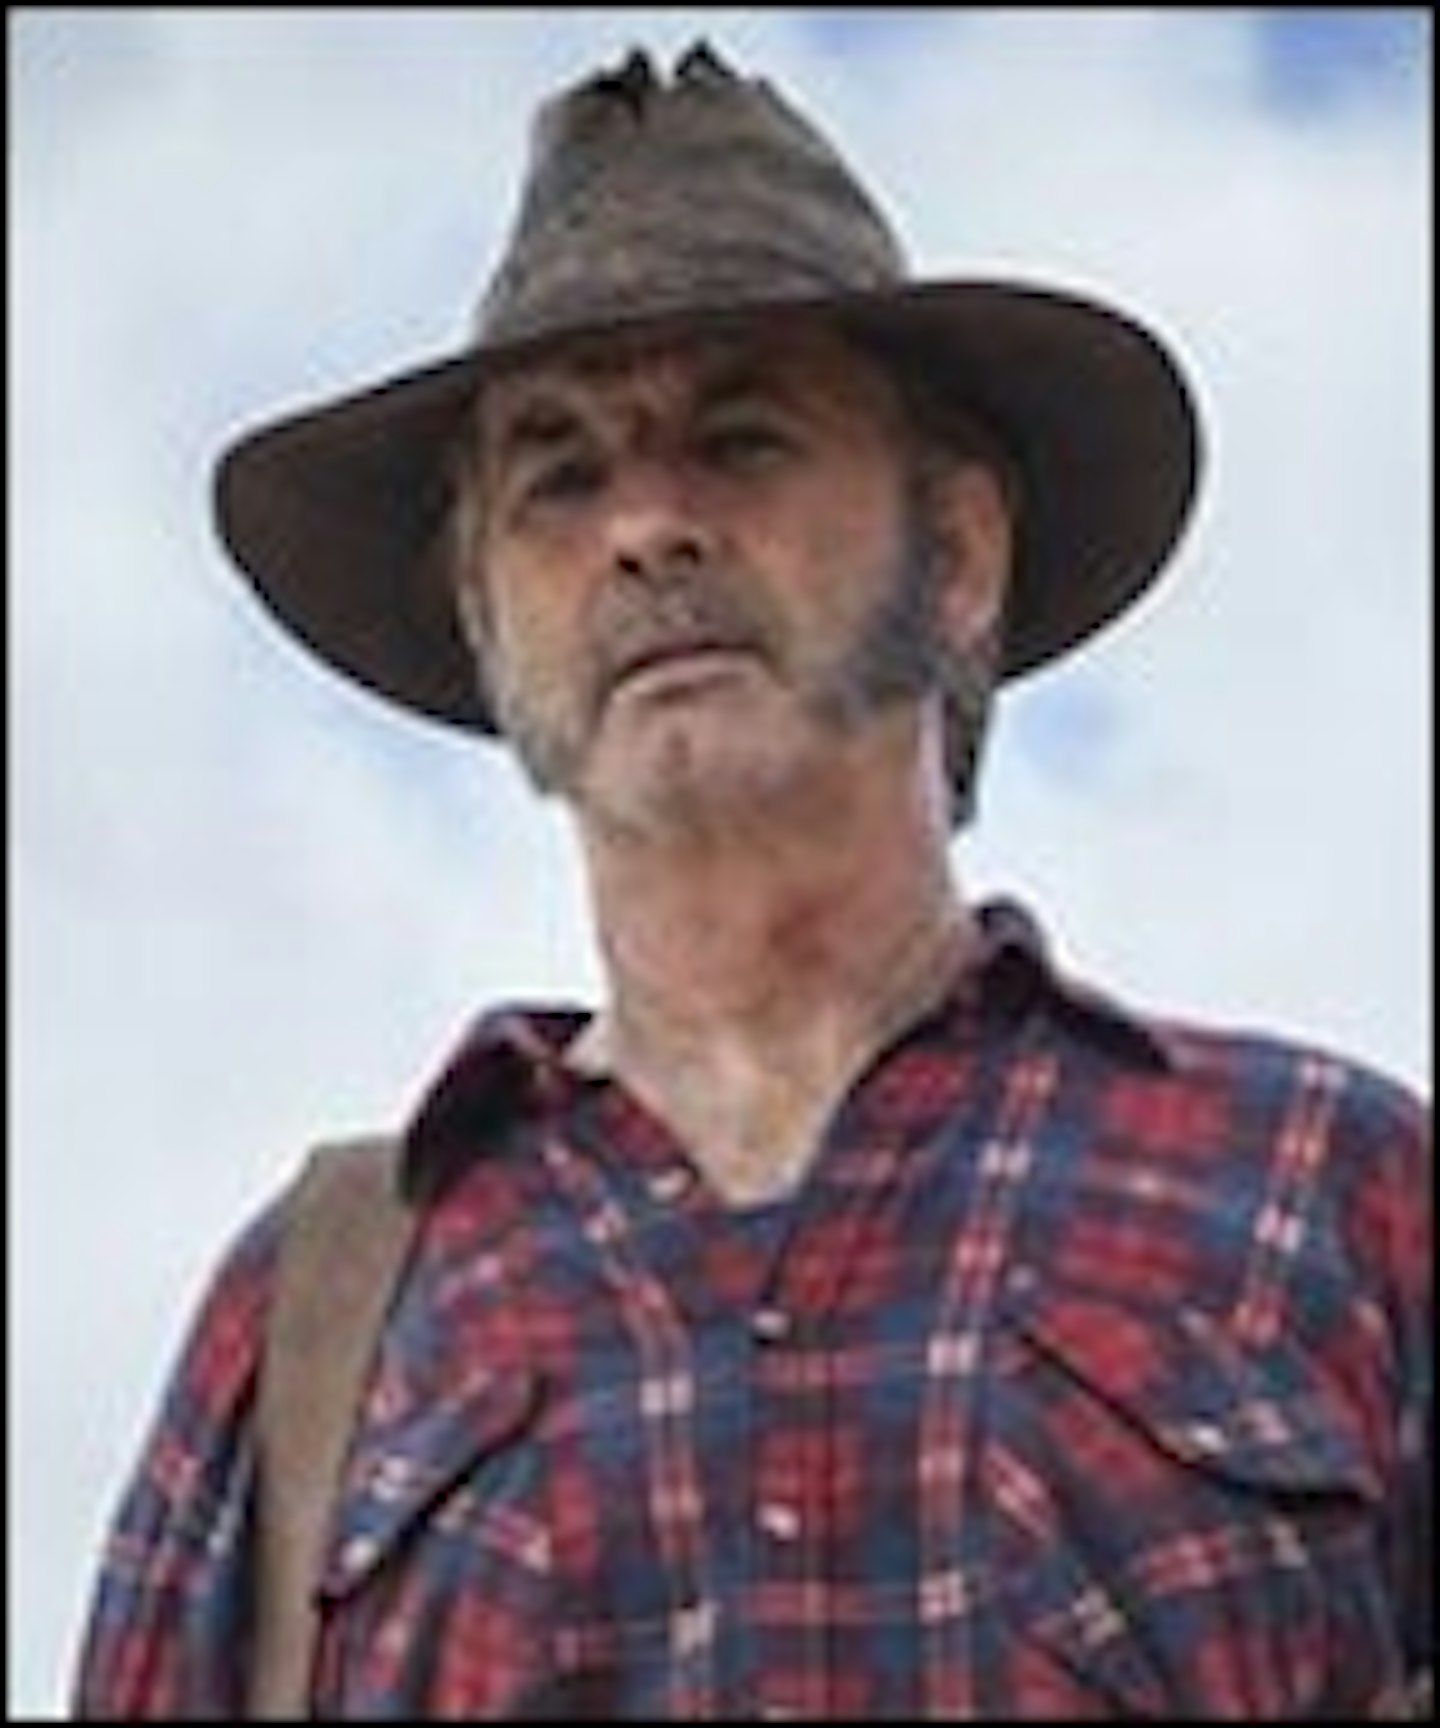 New Trailer For Wolf Creek 2 Online